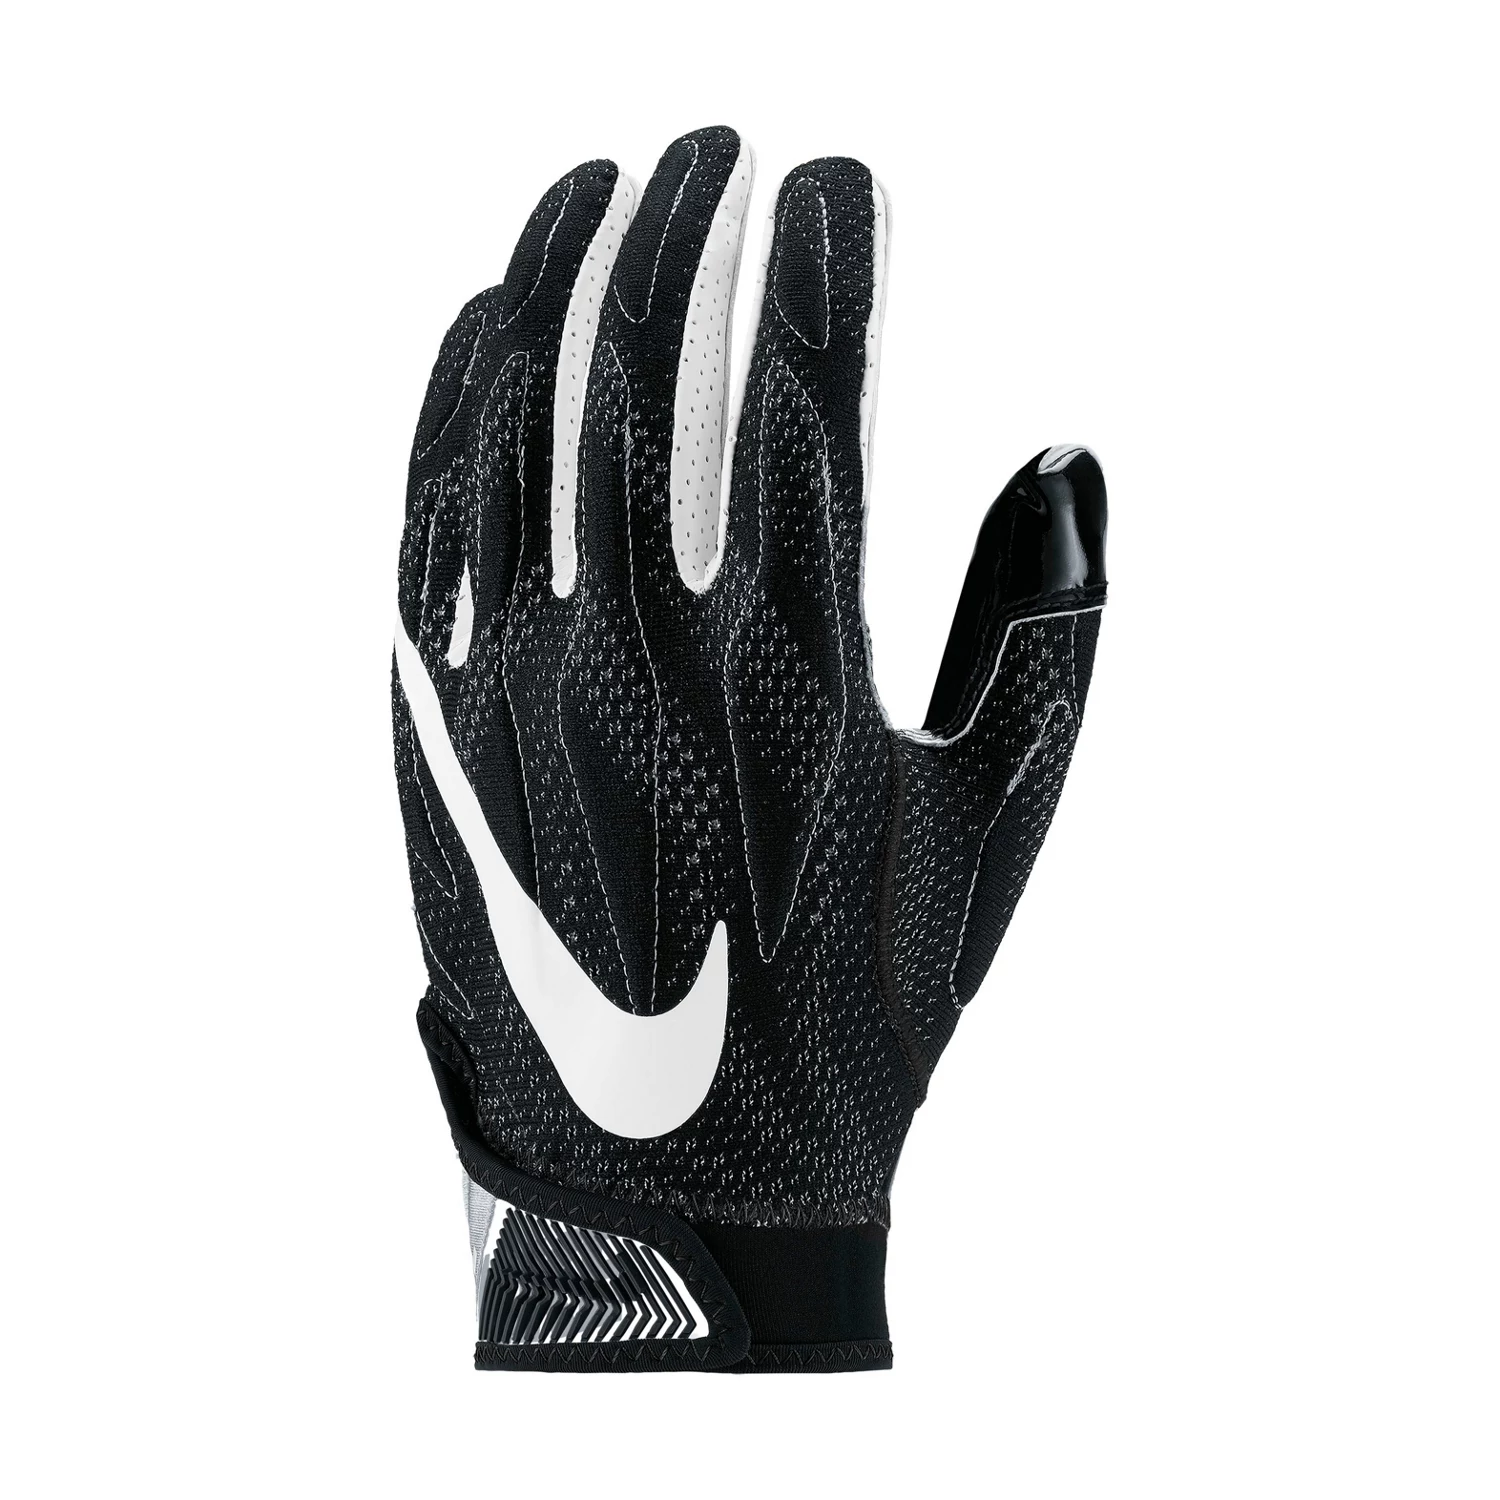 cheap wide receiver football gloves